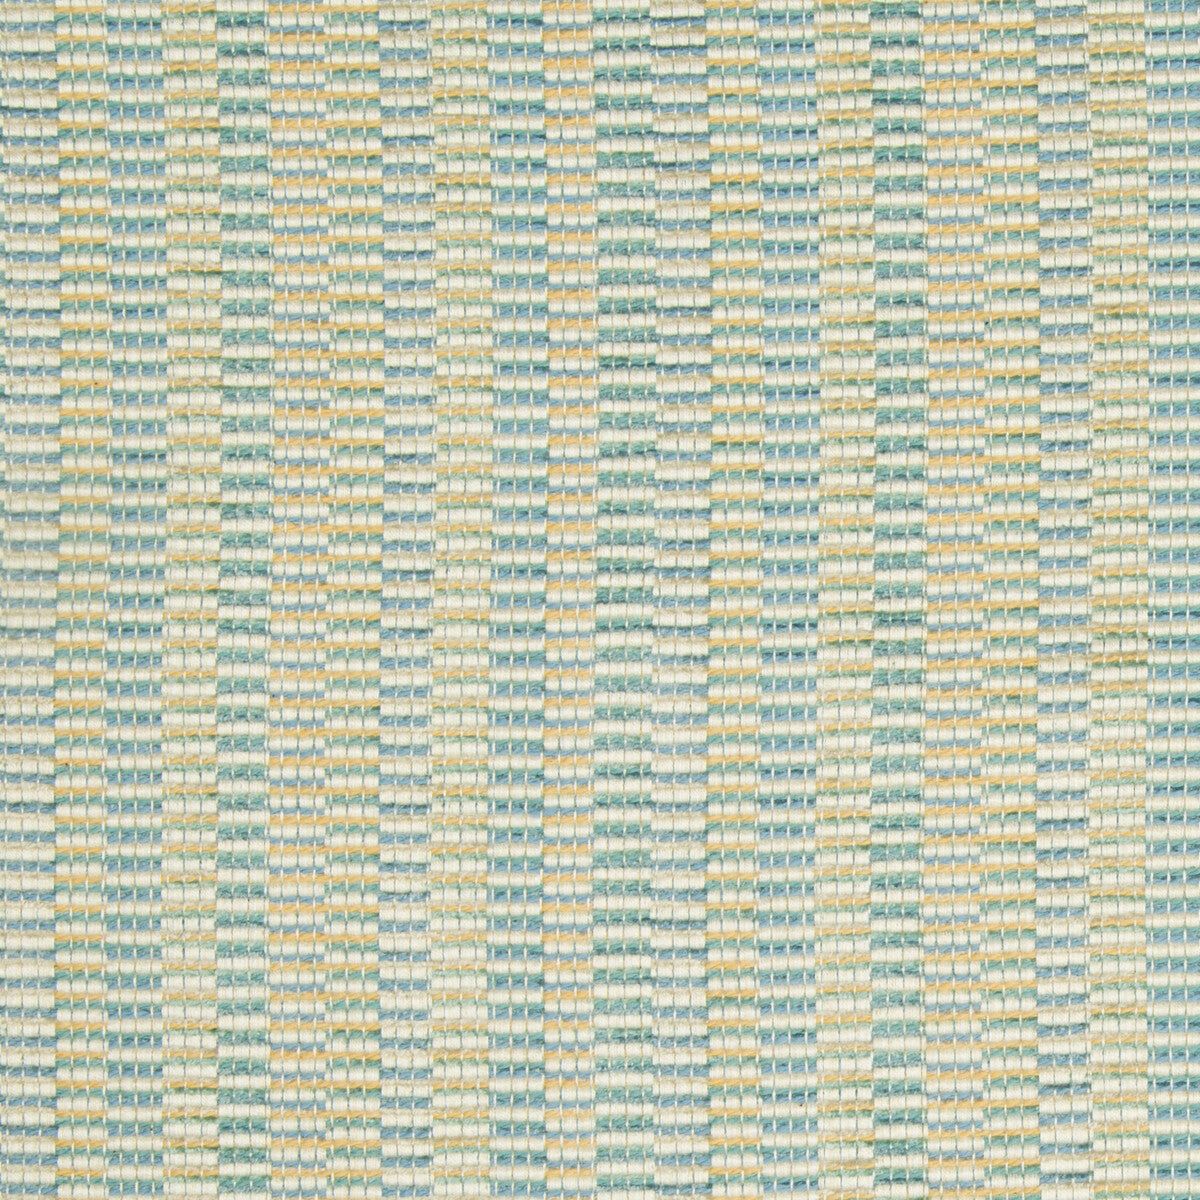 Kravet Contract fabric in 34732-514 color - pattern 34732.514.0 - by Kravet Contract in the Crypton Incase collection